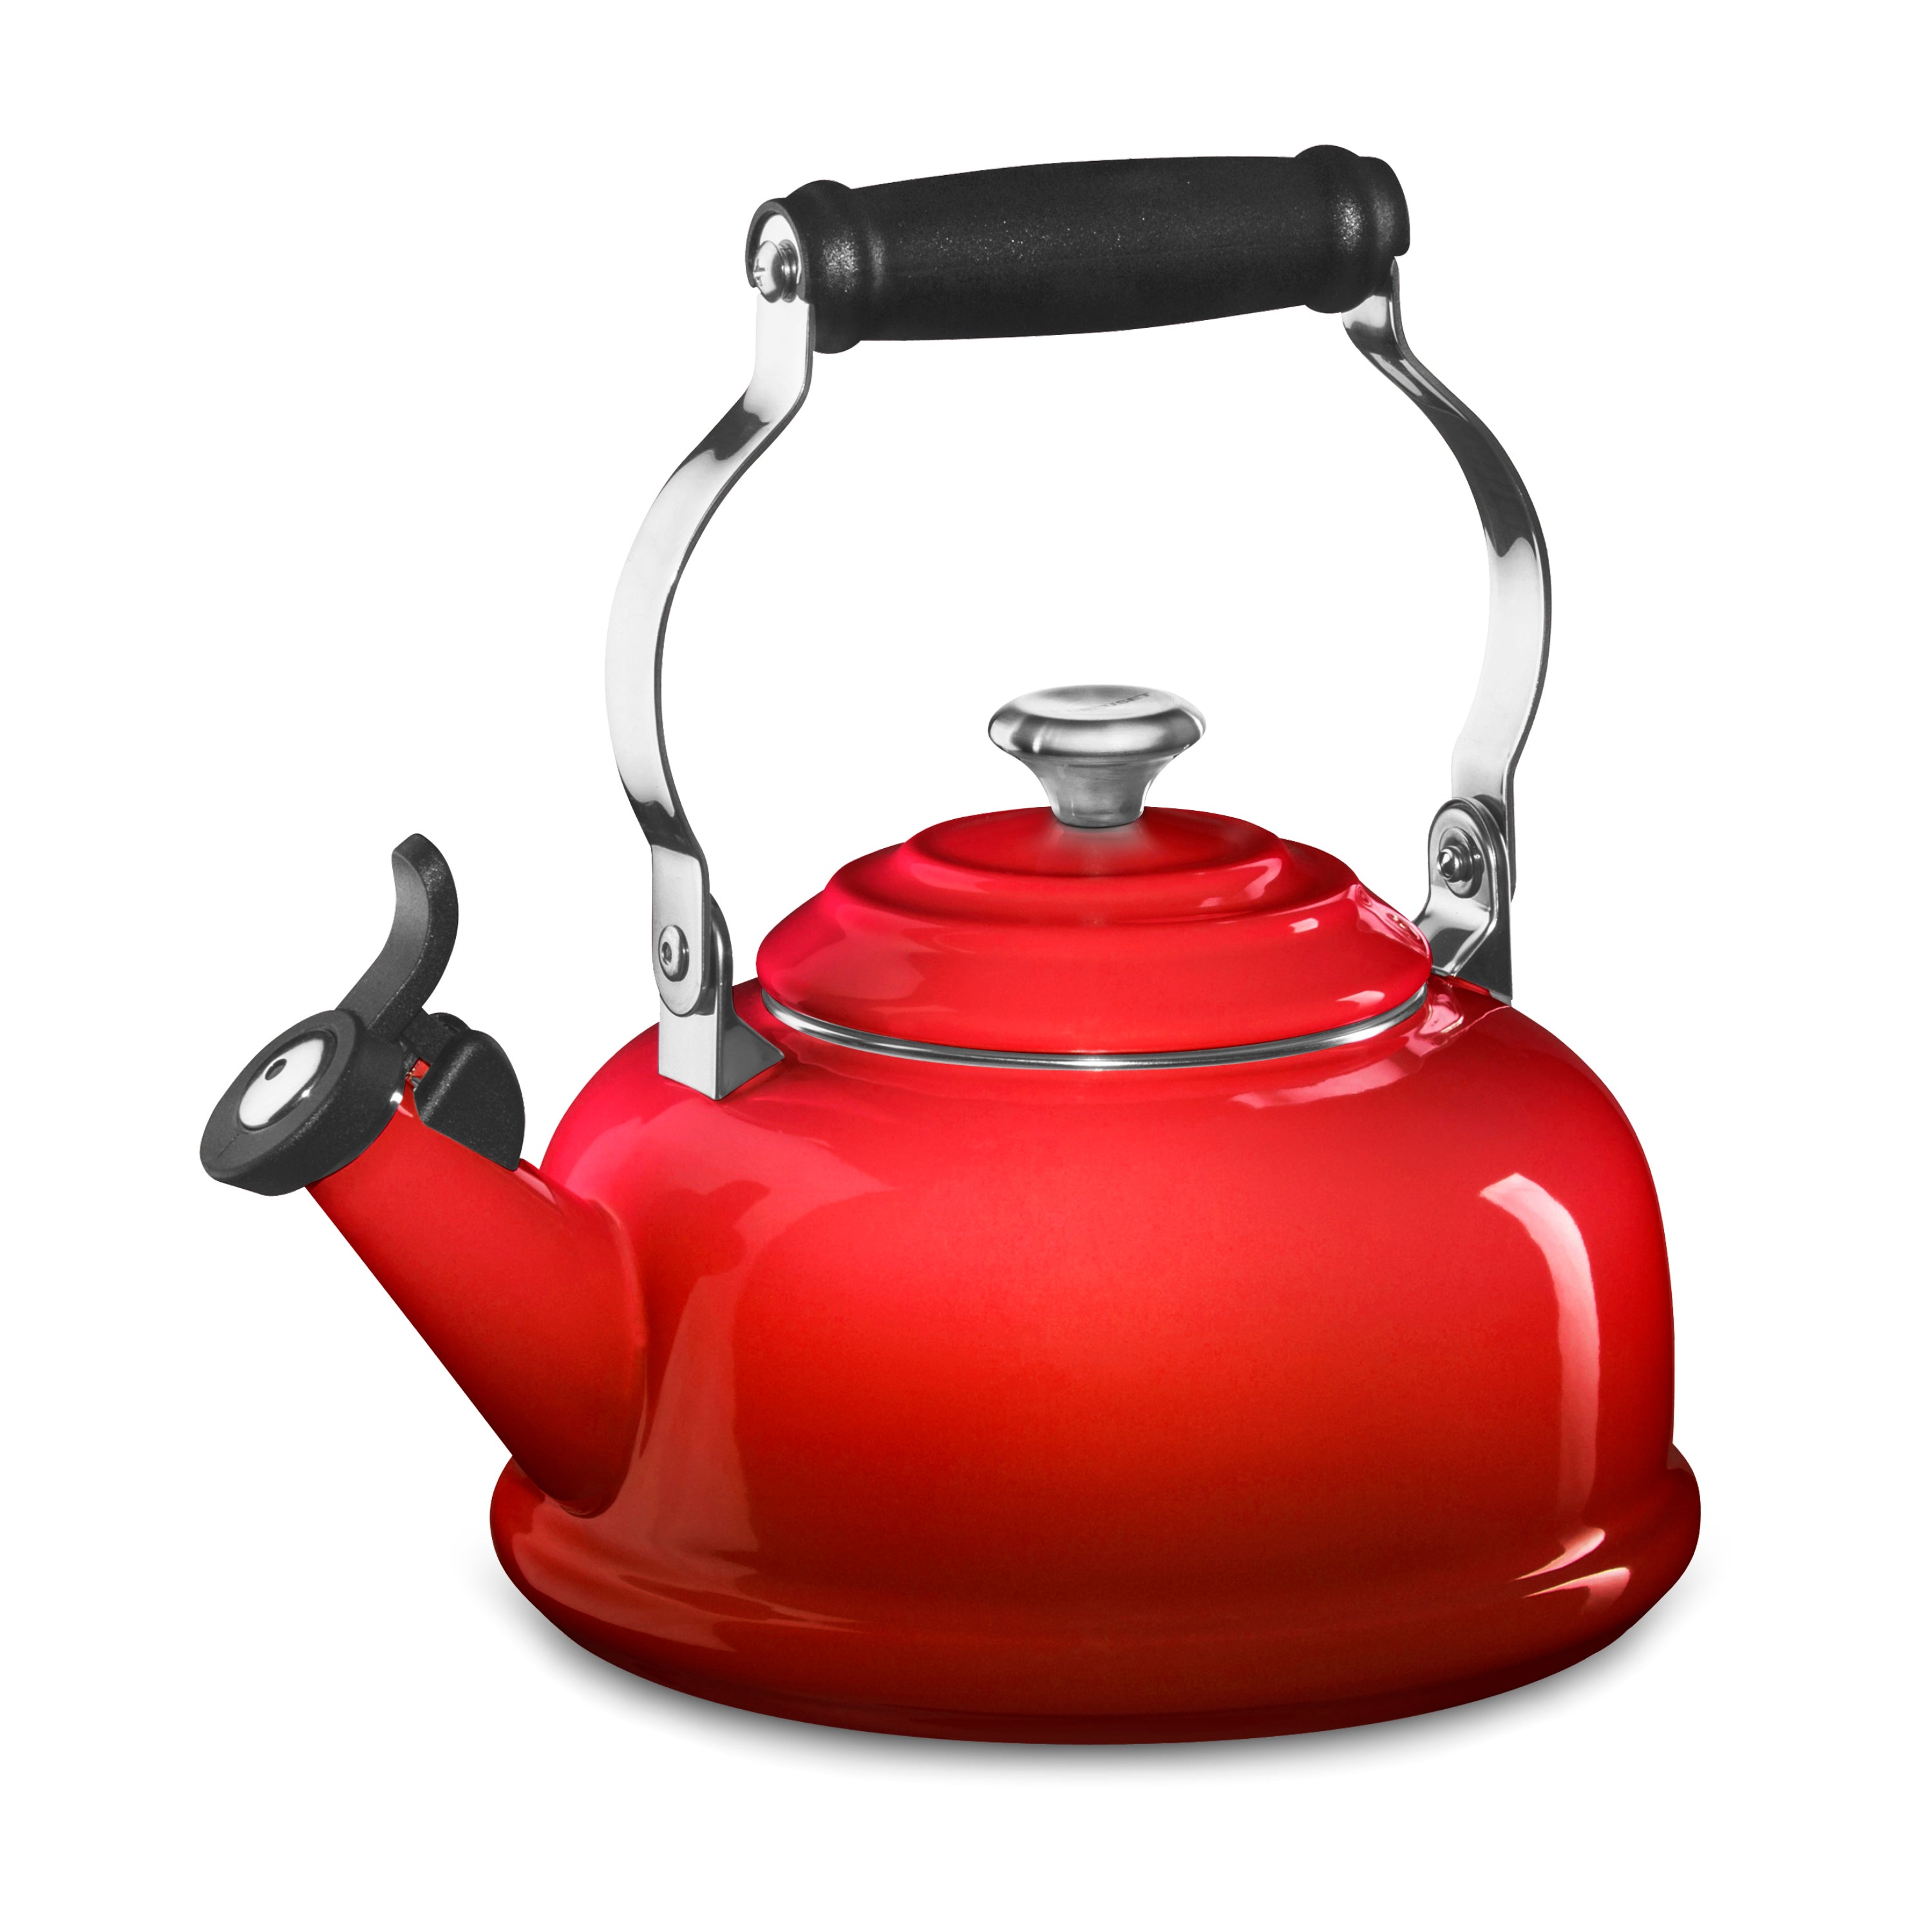 Le Creuset Tea Kettle - 1.7-qt Whistling - Cerise – Cutlery and More